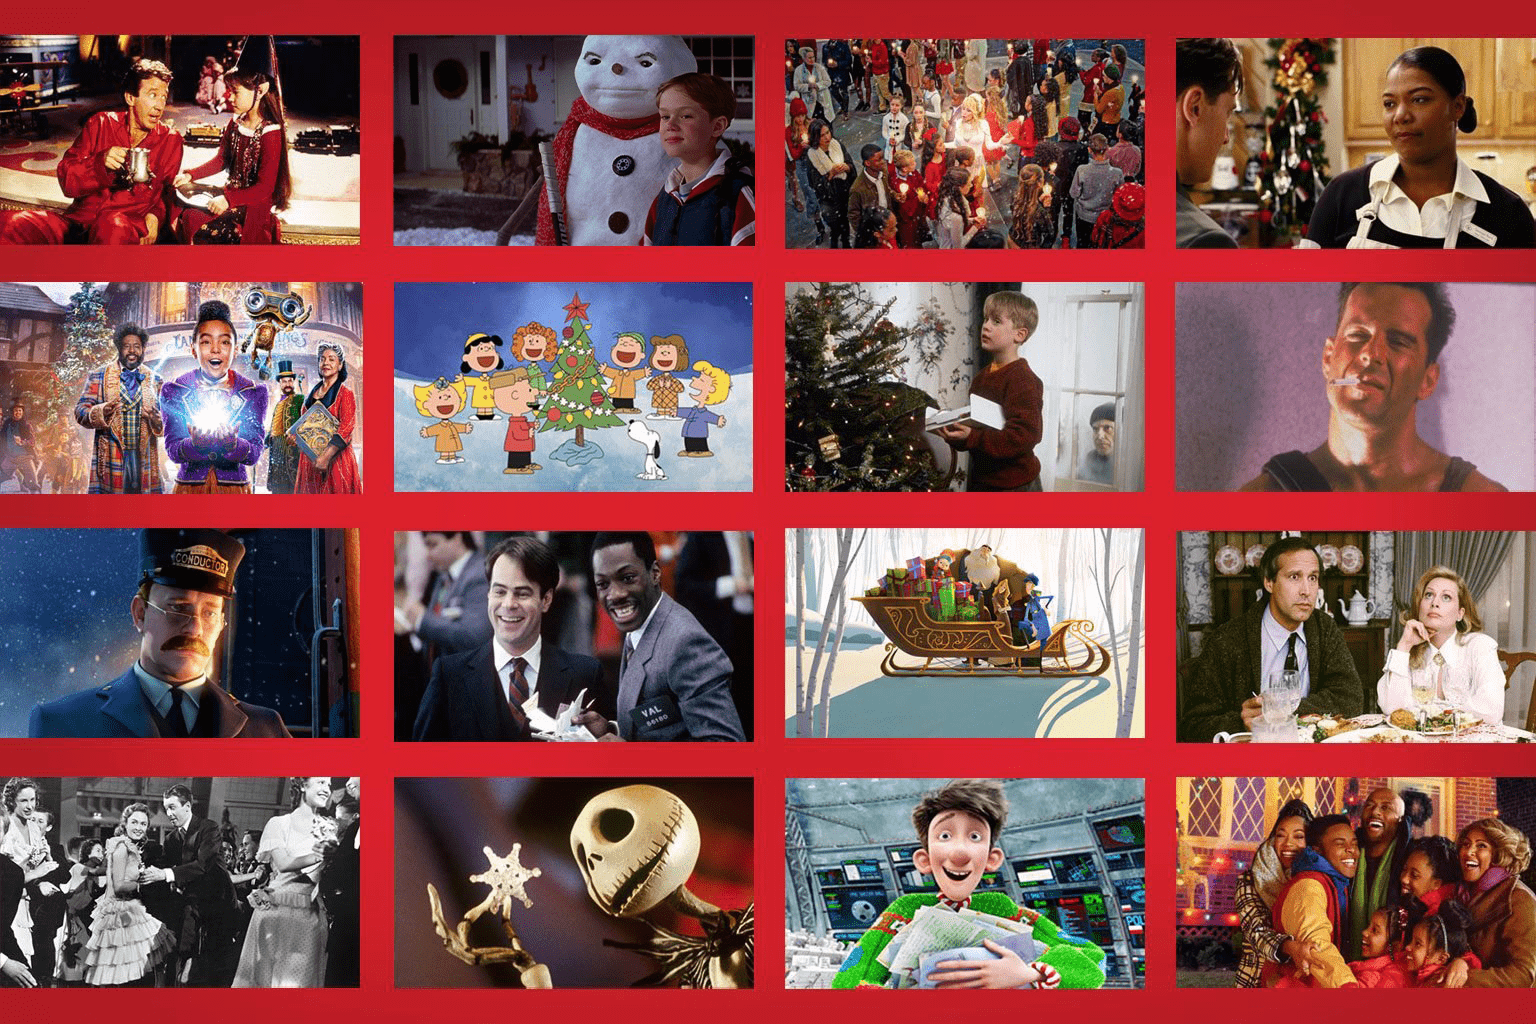 Best Christmas Movies of All Time